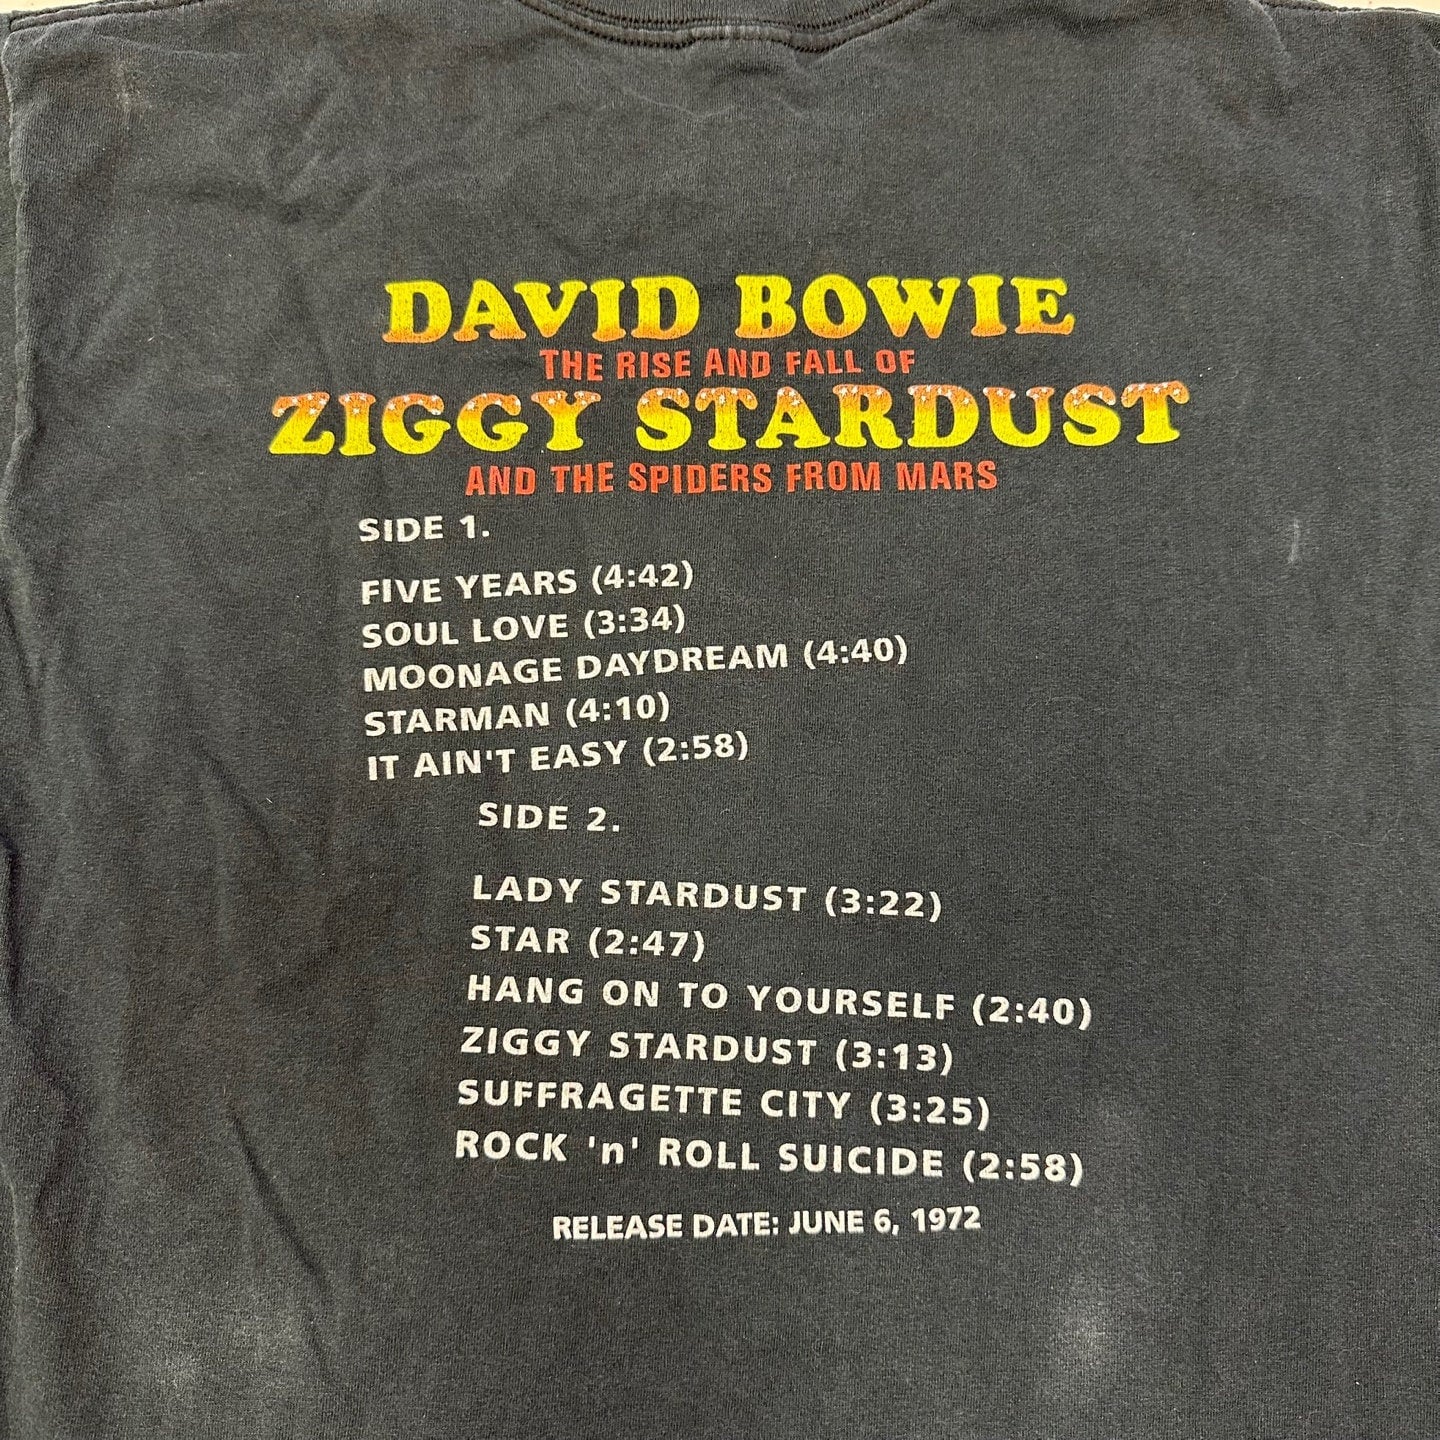 1998 Vintage David Bowe The Rise and Fall of Ziggy Stardust and the Spiders from Mars T-Shirt | Vintage T-Shirt | Size M | SKU M-2073 |